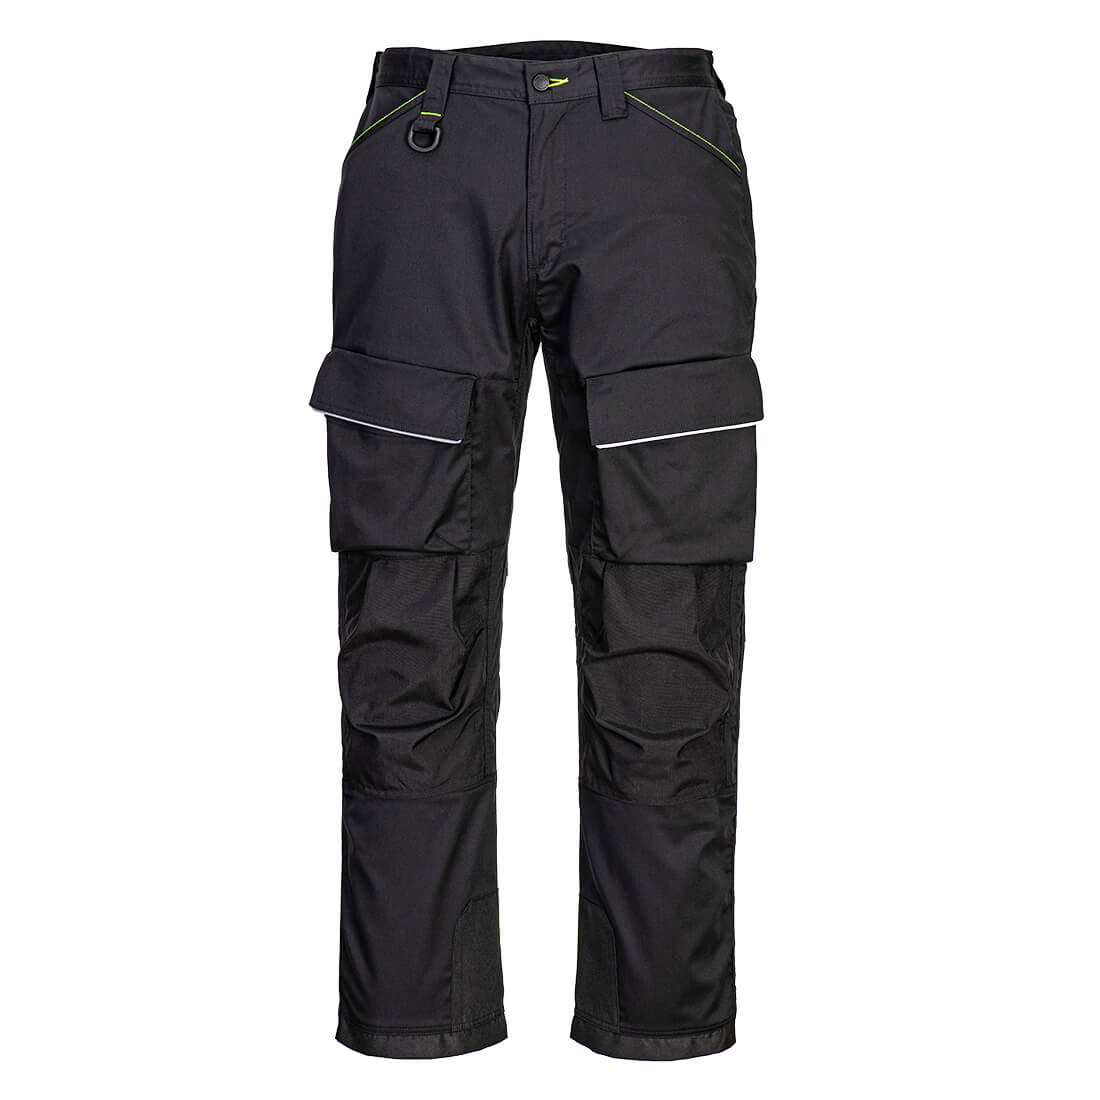 Portwest PW322 - PW3 Harness Trousers